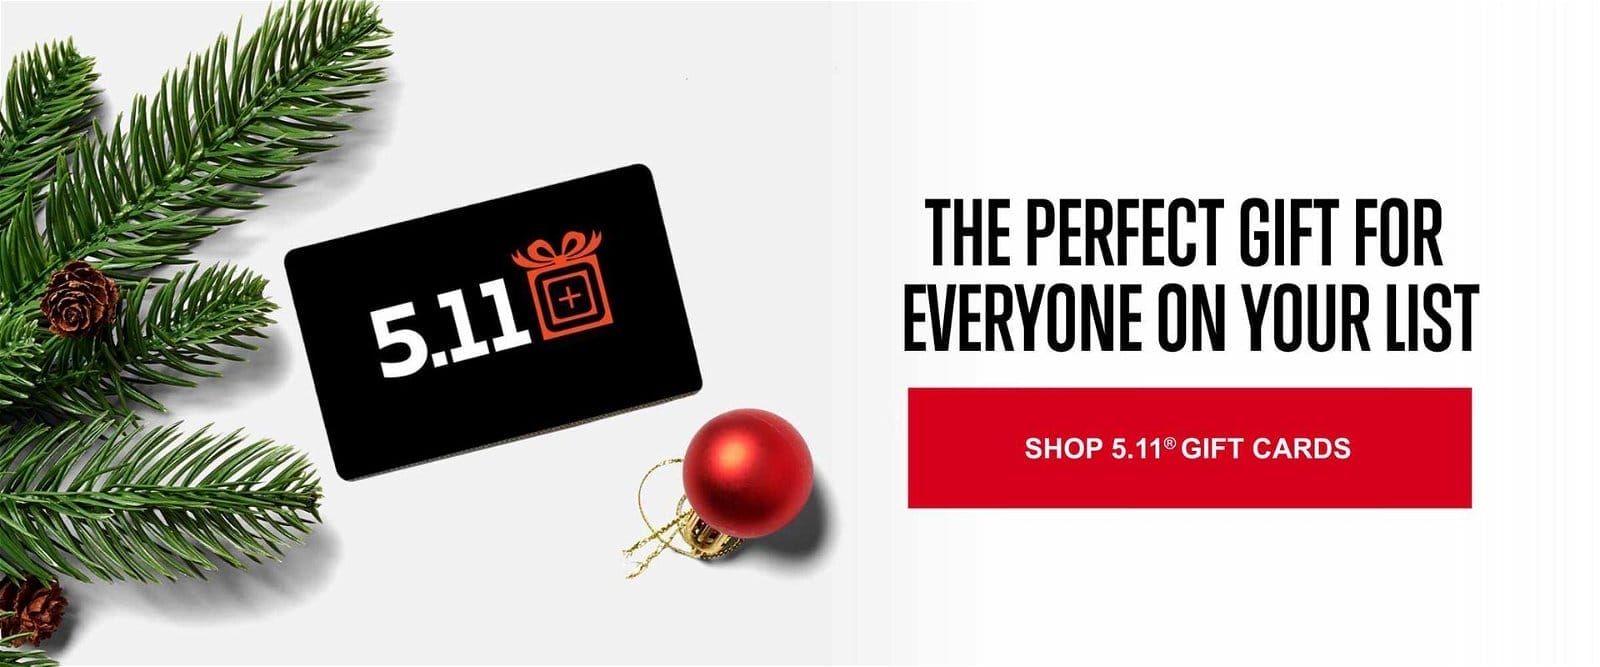 Shop 5.11 Gift Cards